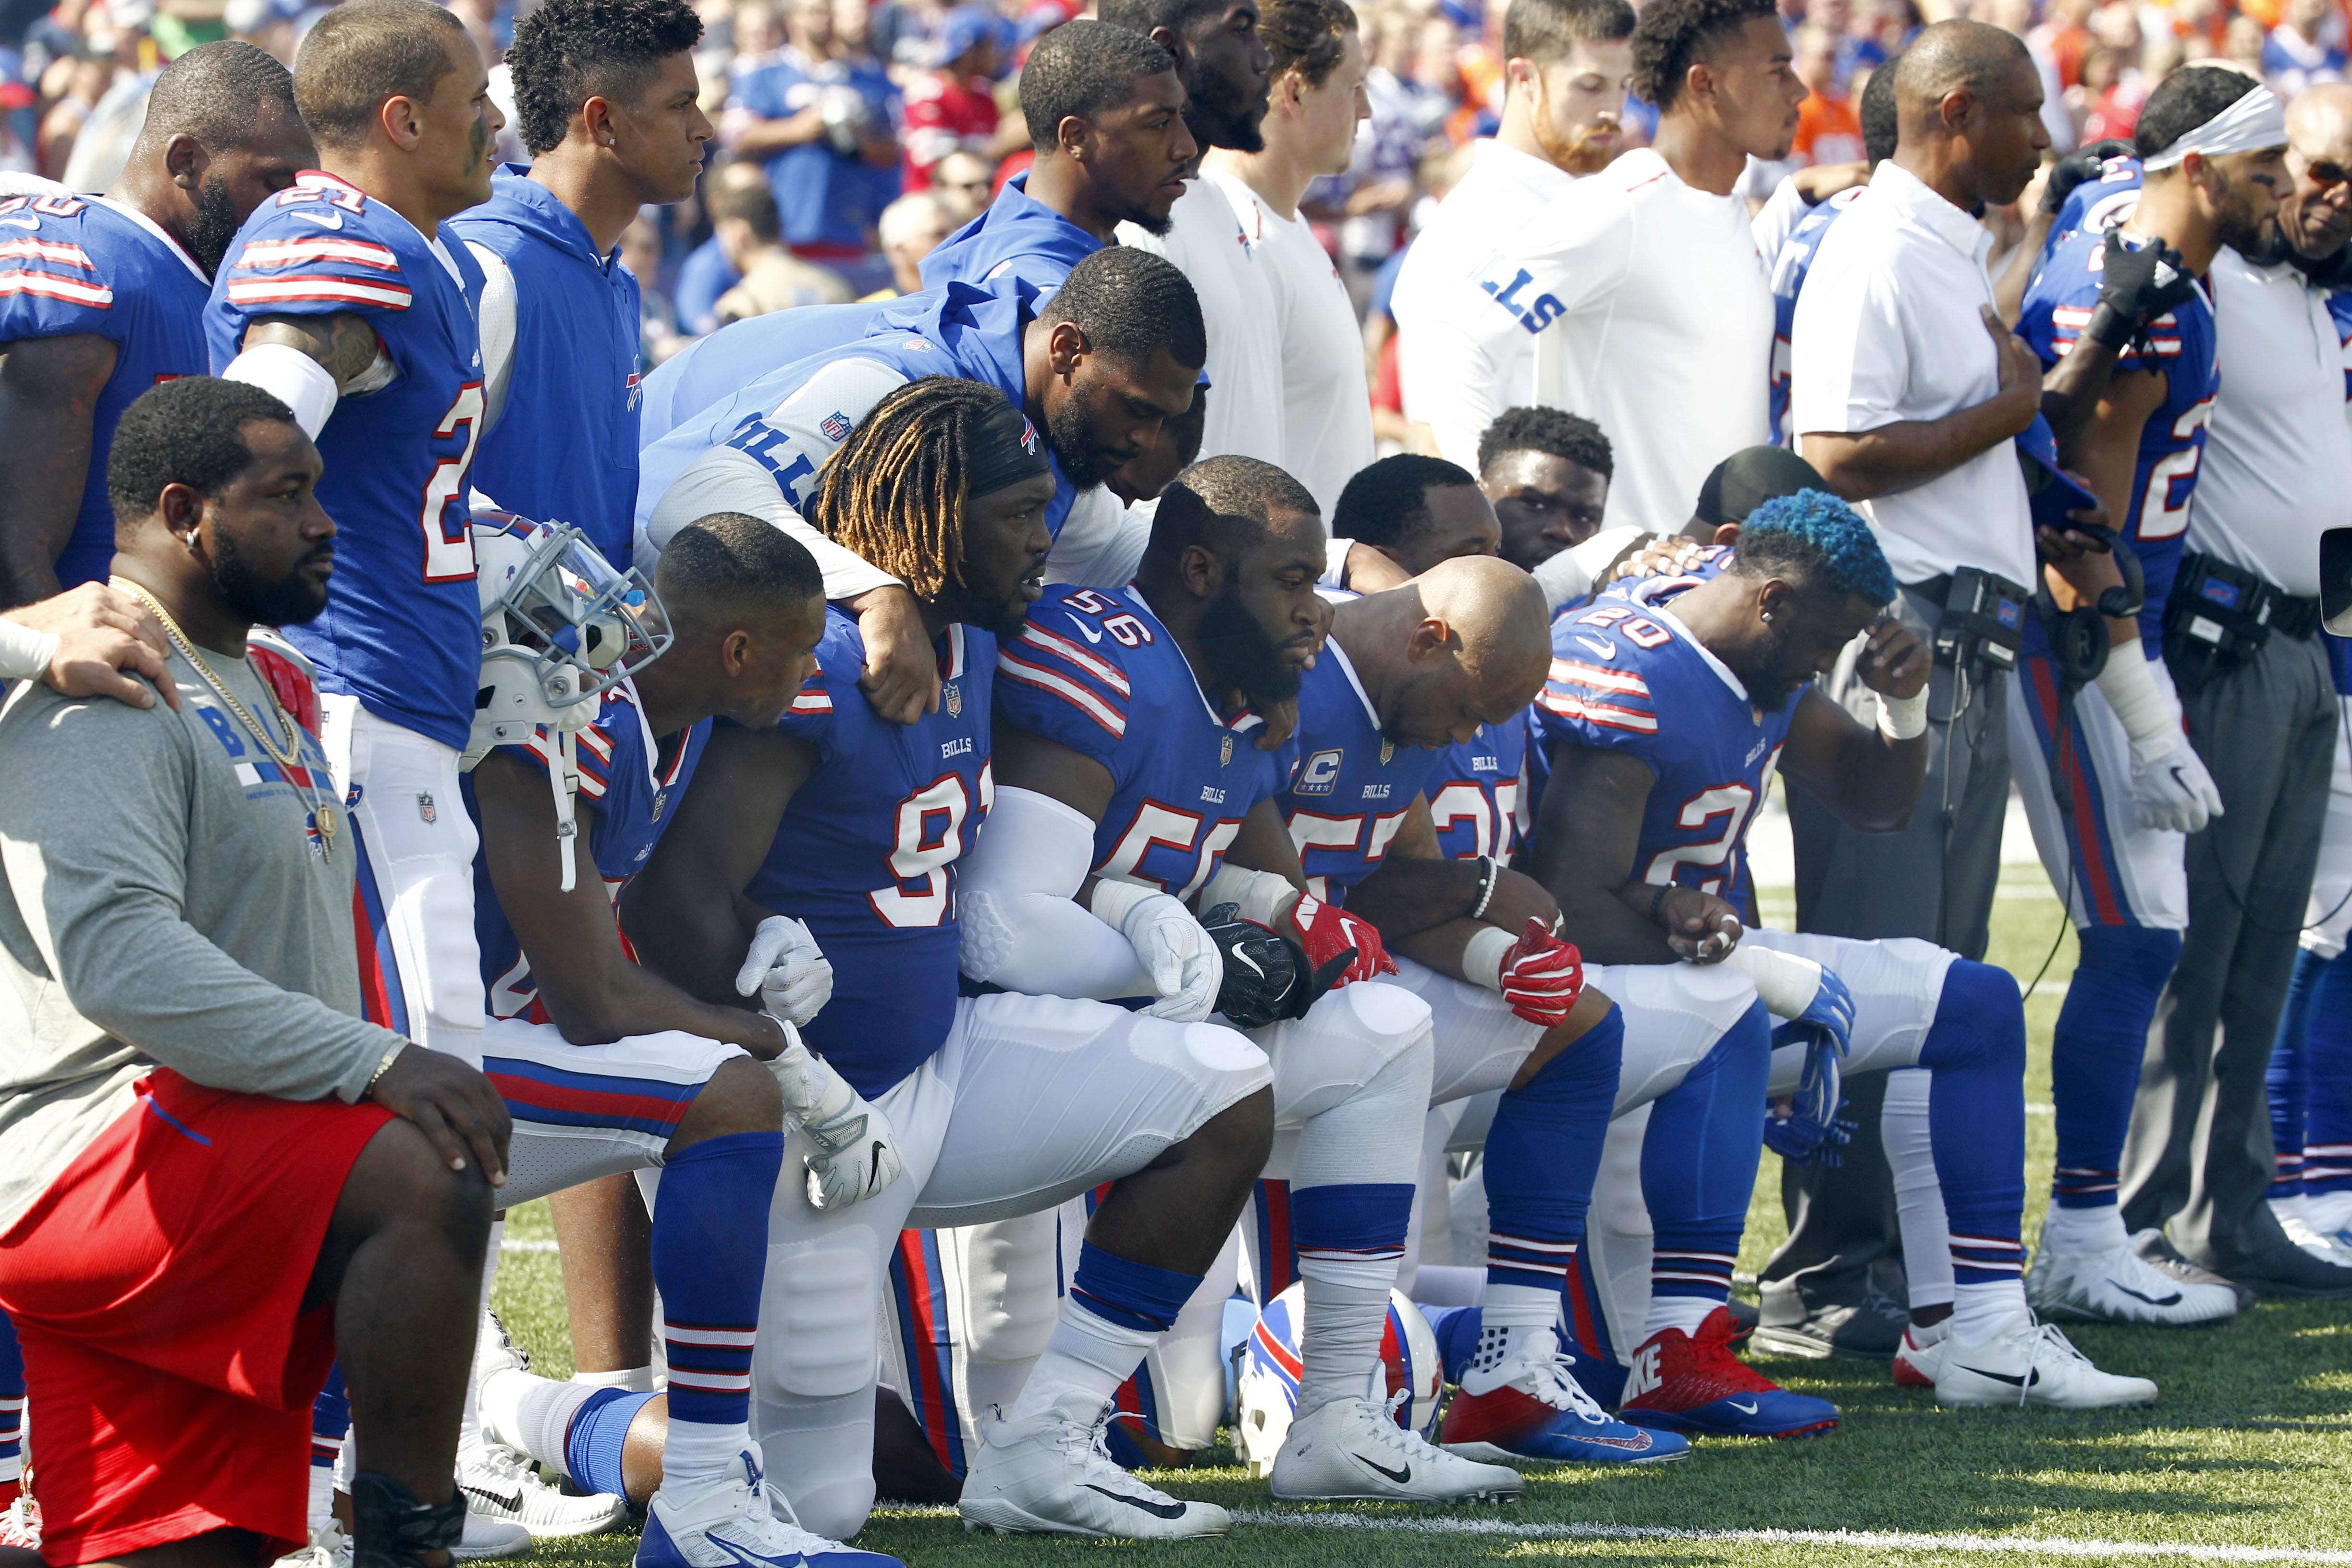 Kneeling for the flag honors America by holding it accountable